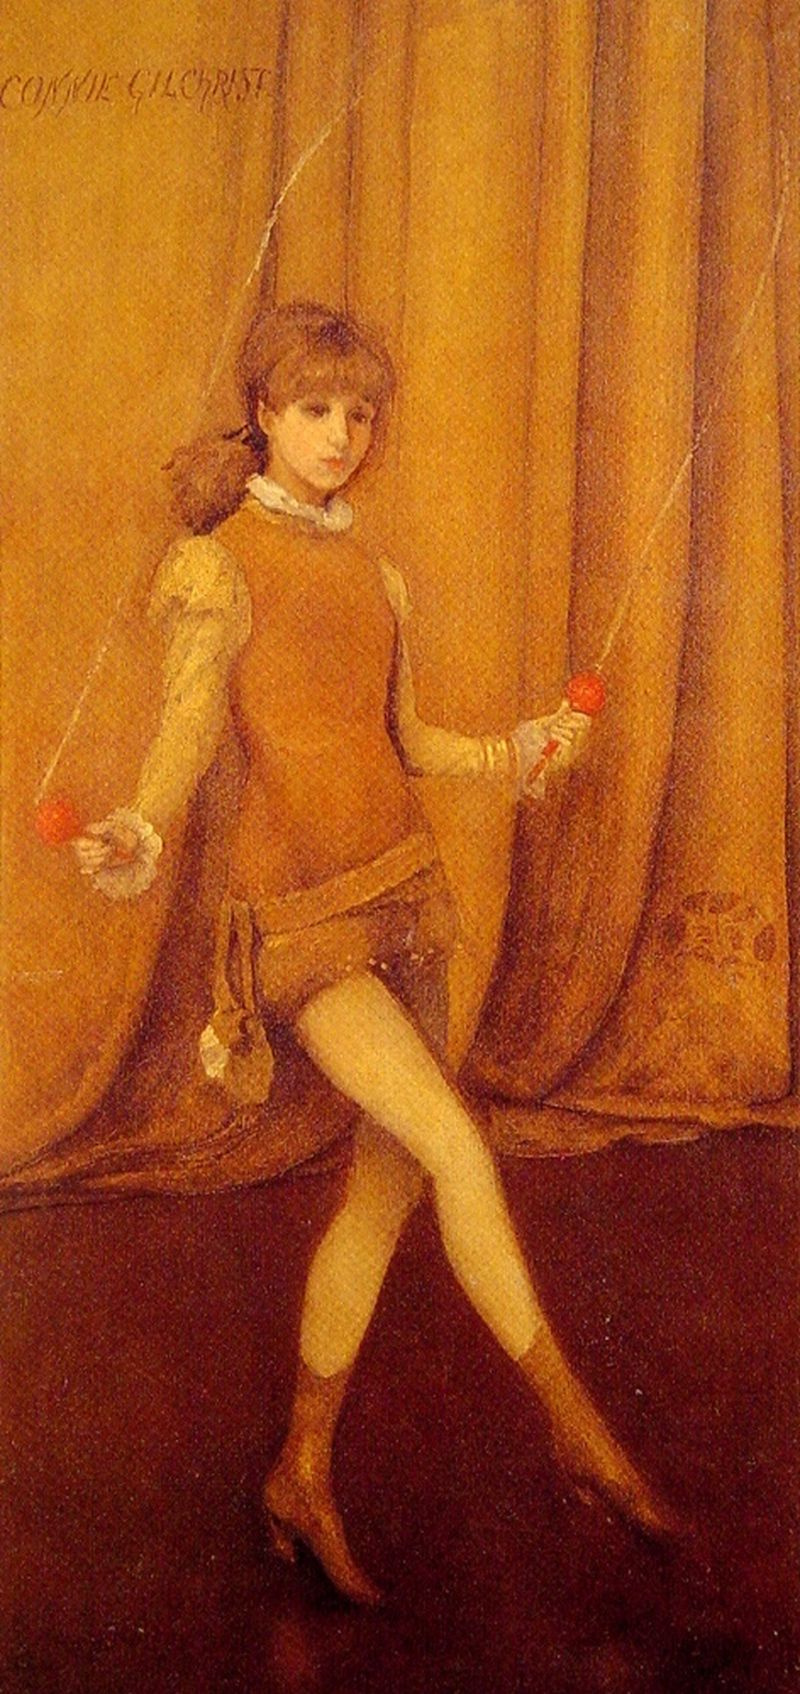 James Abbot McNeill Whistler. Harmony in yellow and gold: the gold girl Connie Gilchrist